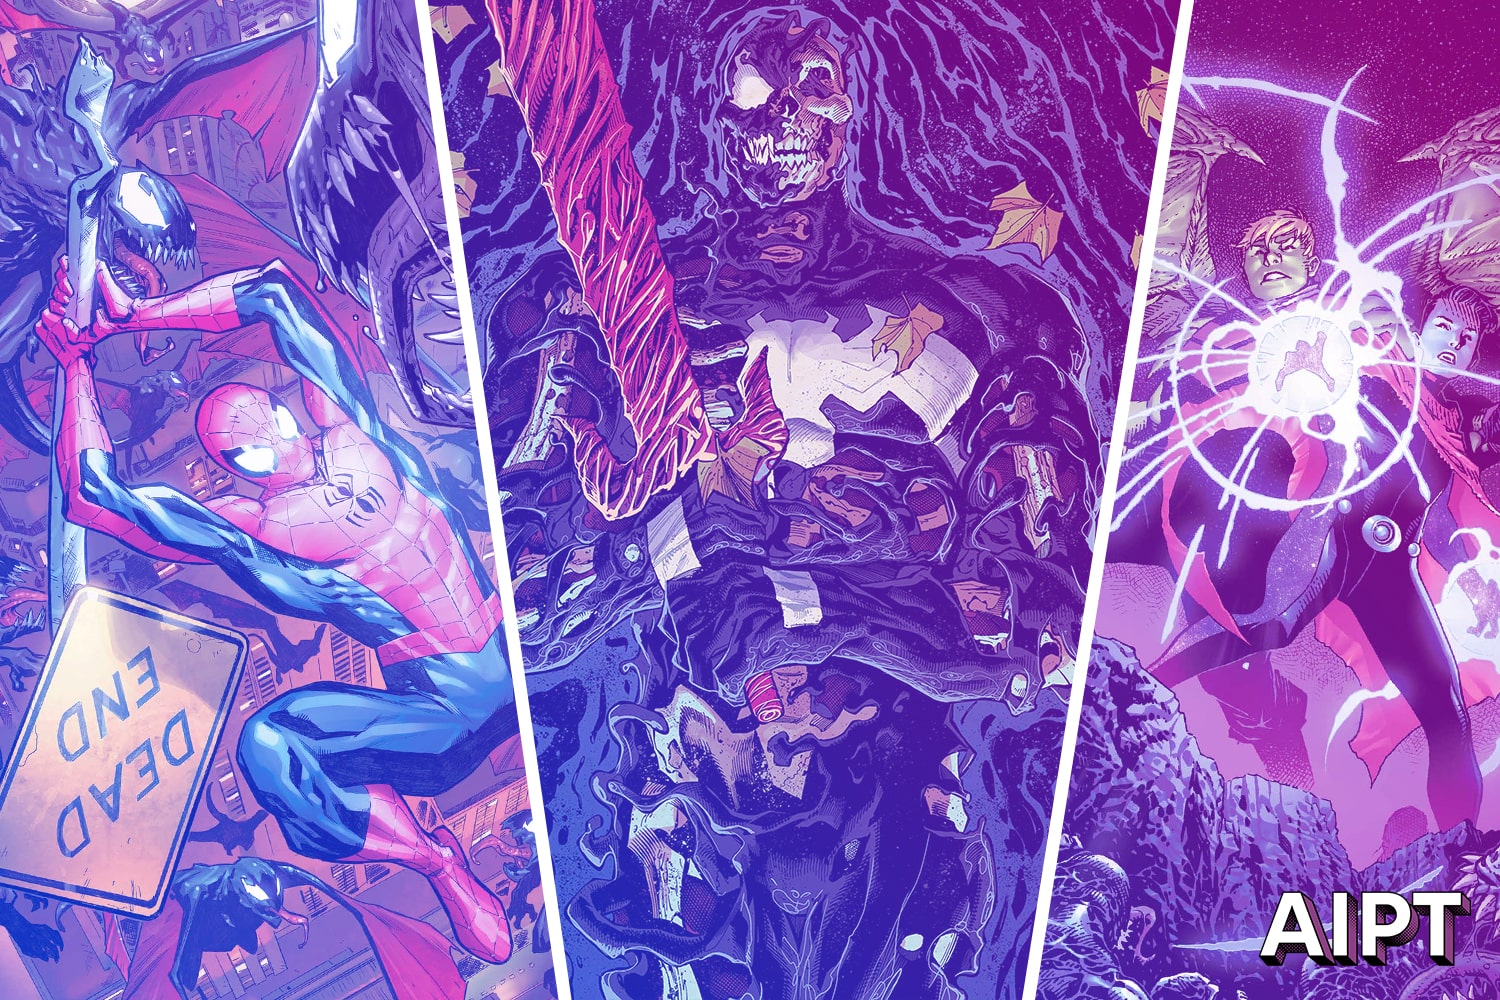 Marvel Comics reveals new 'King in Black' finale cover art and details